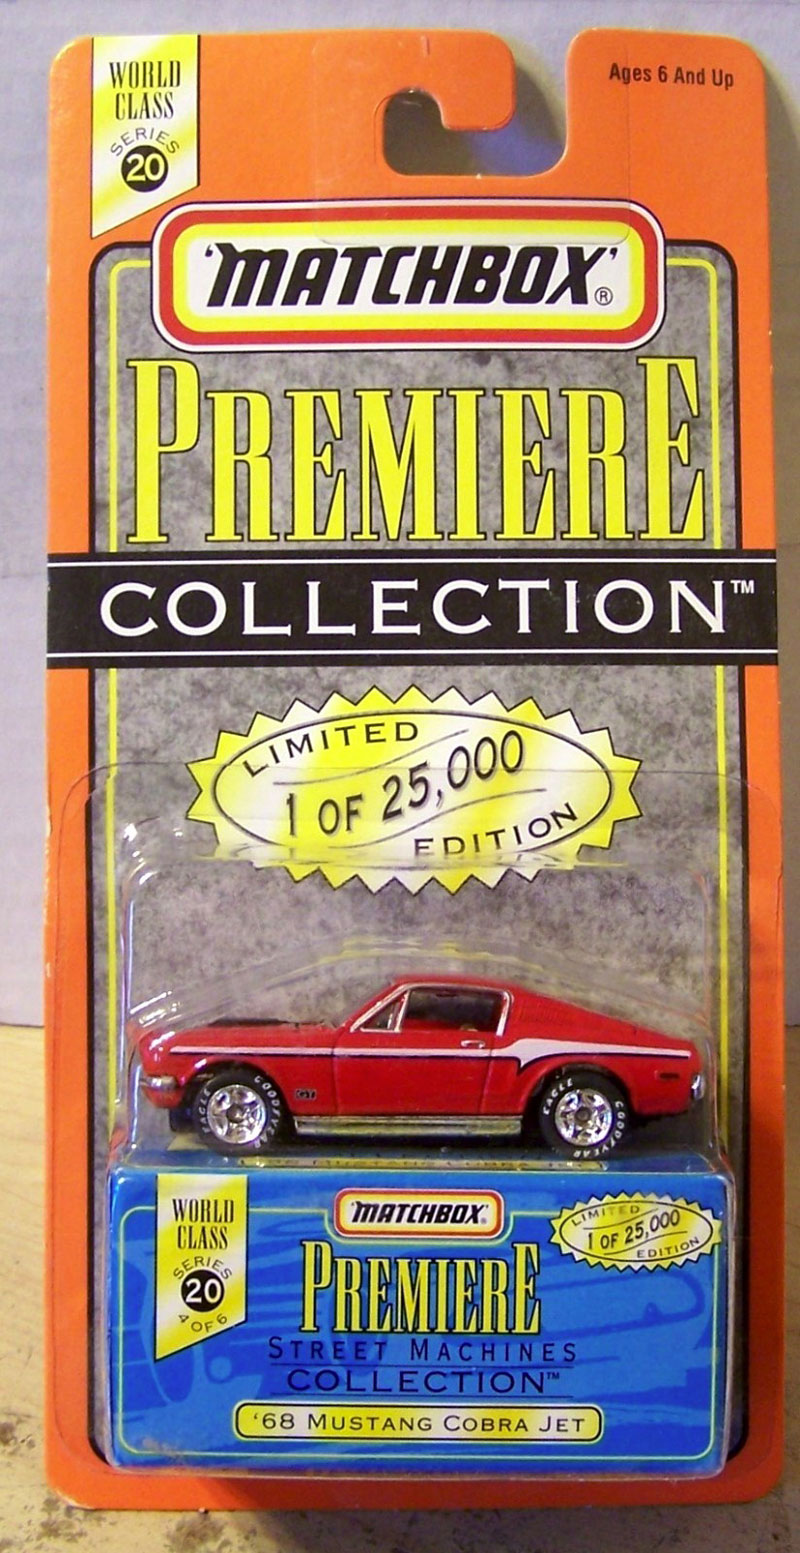 MATCHBOX PREMIERE COLLECTION SERIES 17 '68 MUSTANG COBRA JET WHITE 